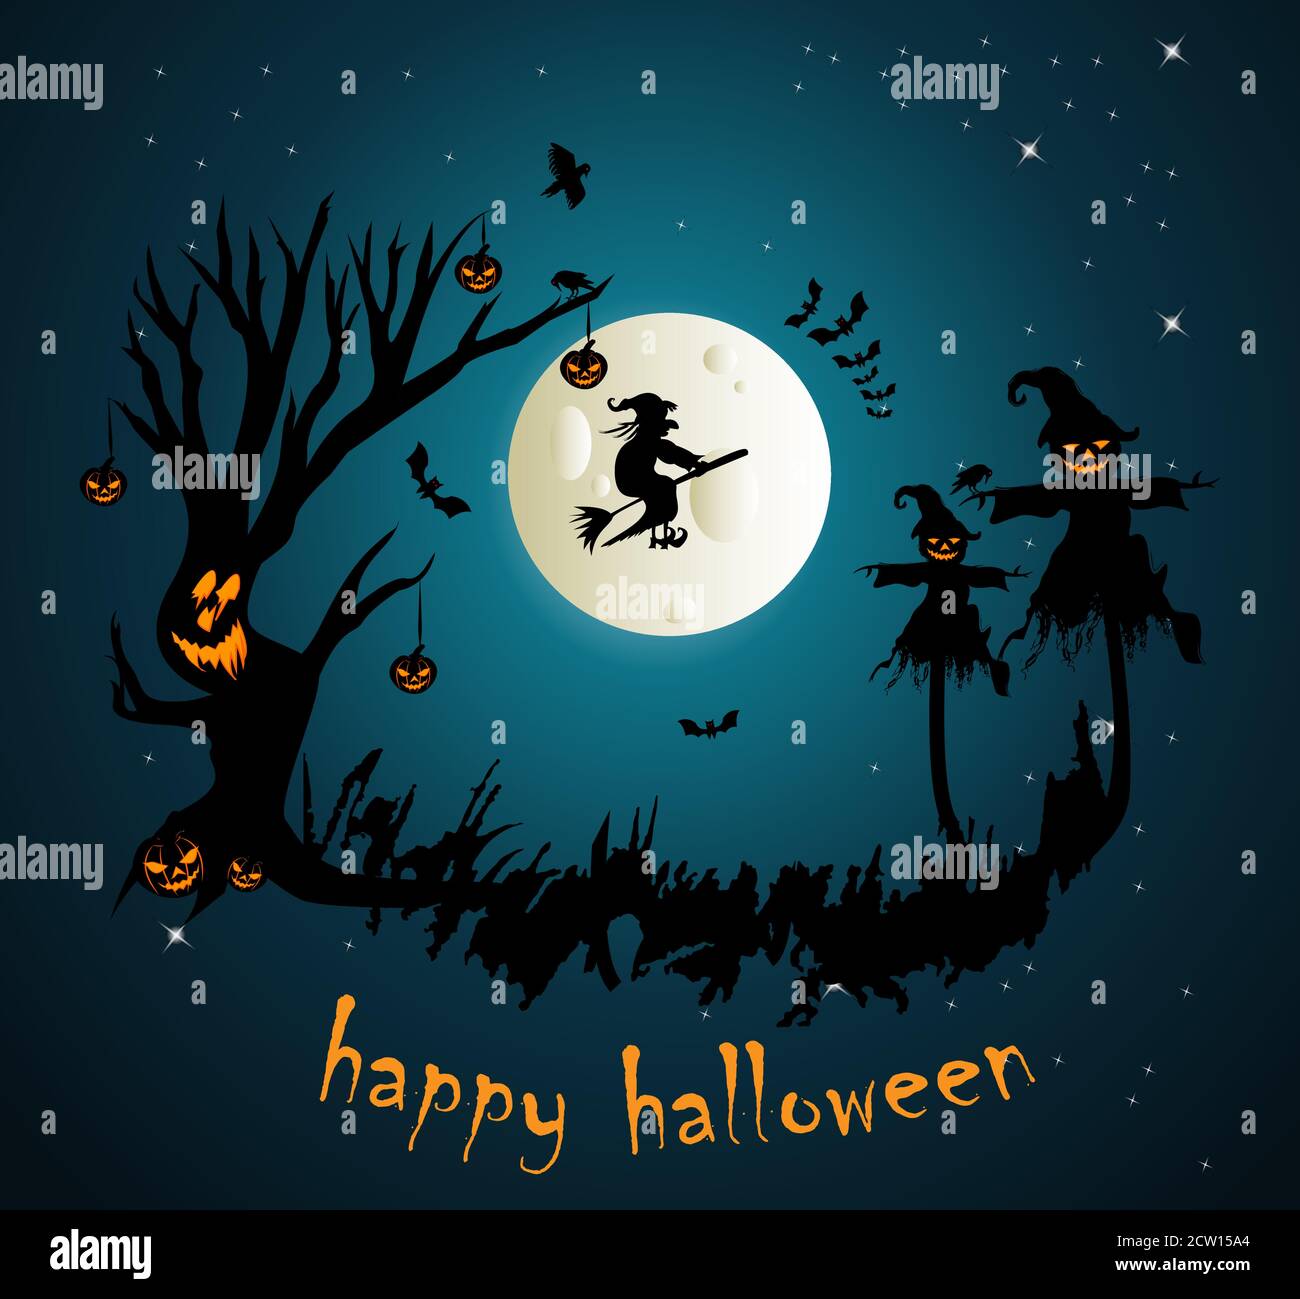 Spooky Halloween tree with scarecrows and witch flying on broom vector illustration for banners, party invitations and greeting cards. Stock Vector